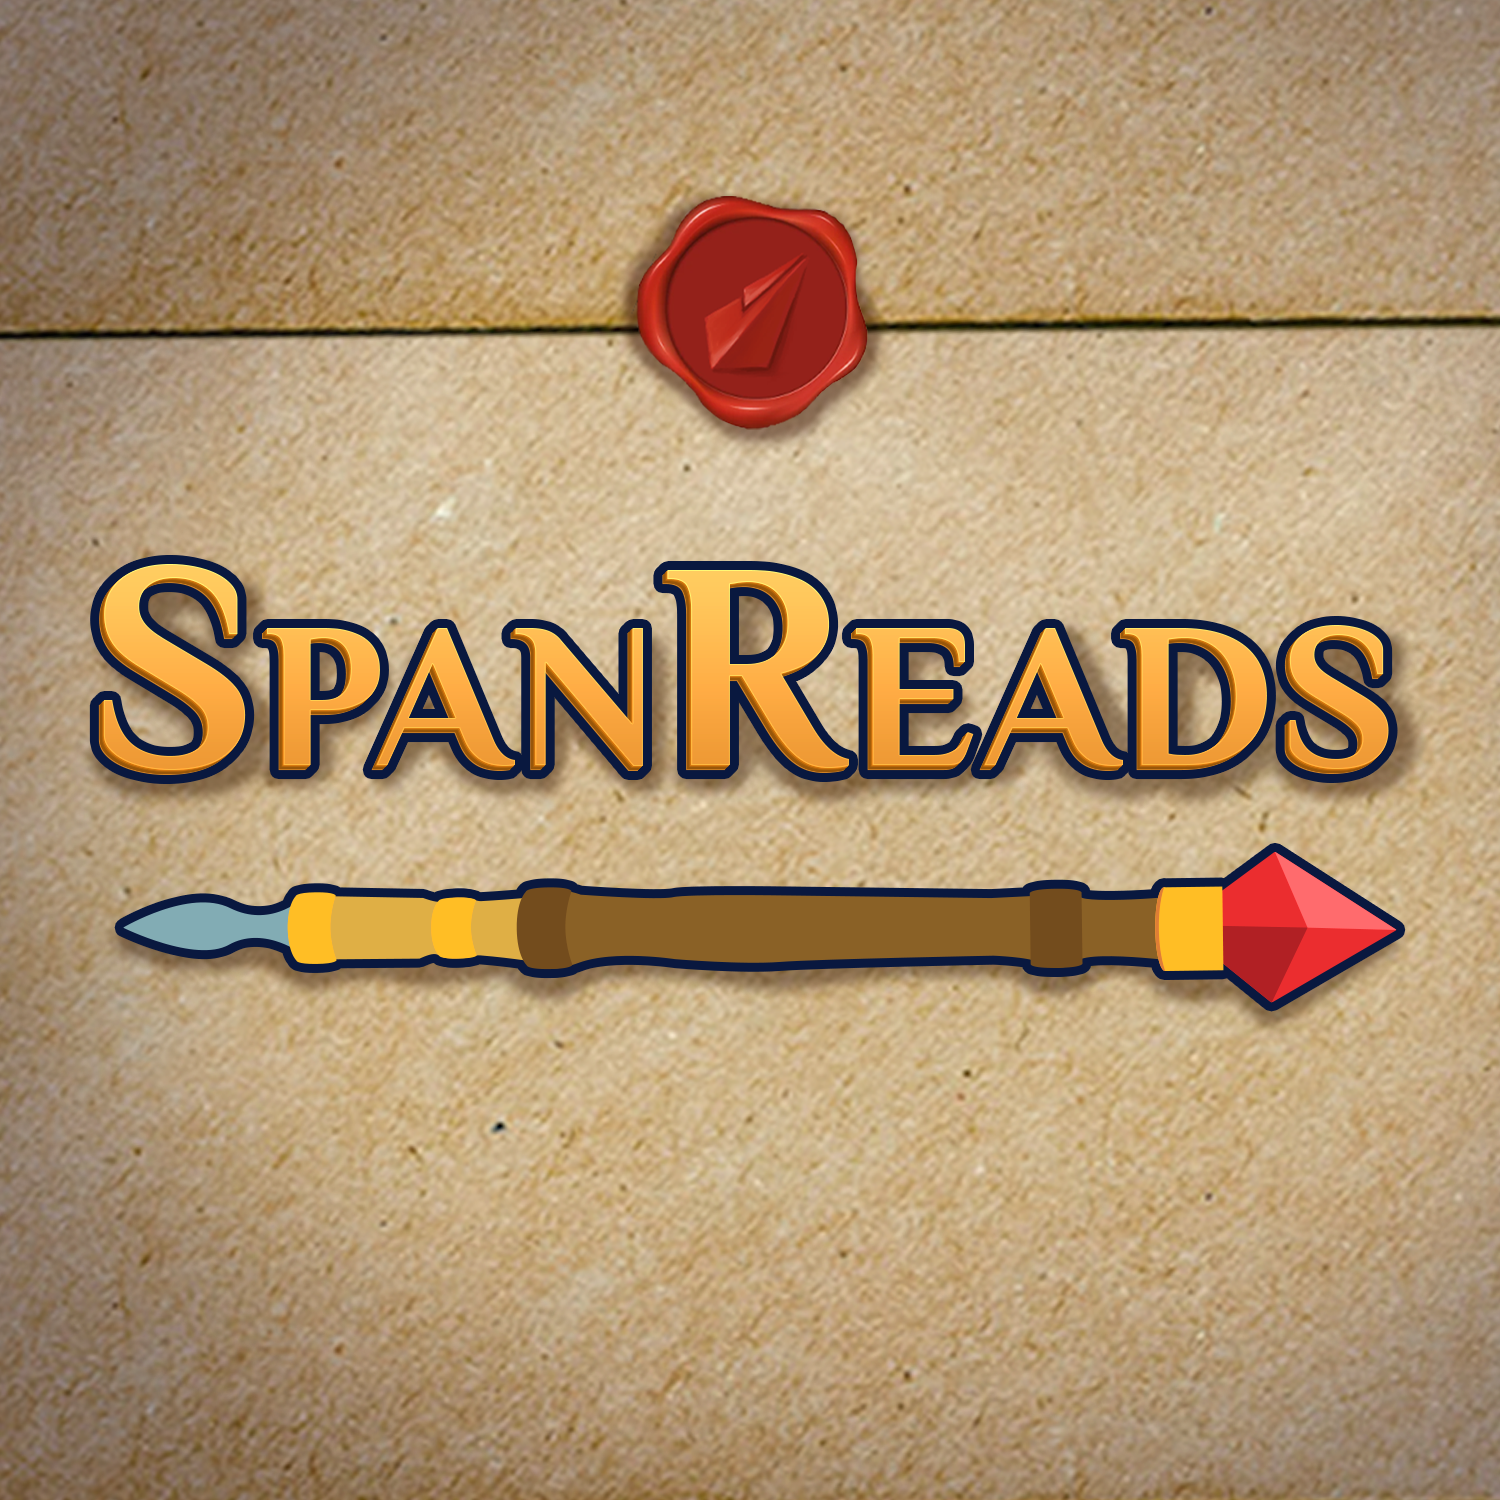 More information about "SpanReads: Skyward - Characters & Relationships"